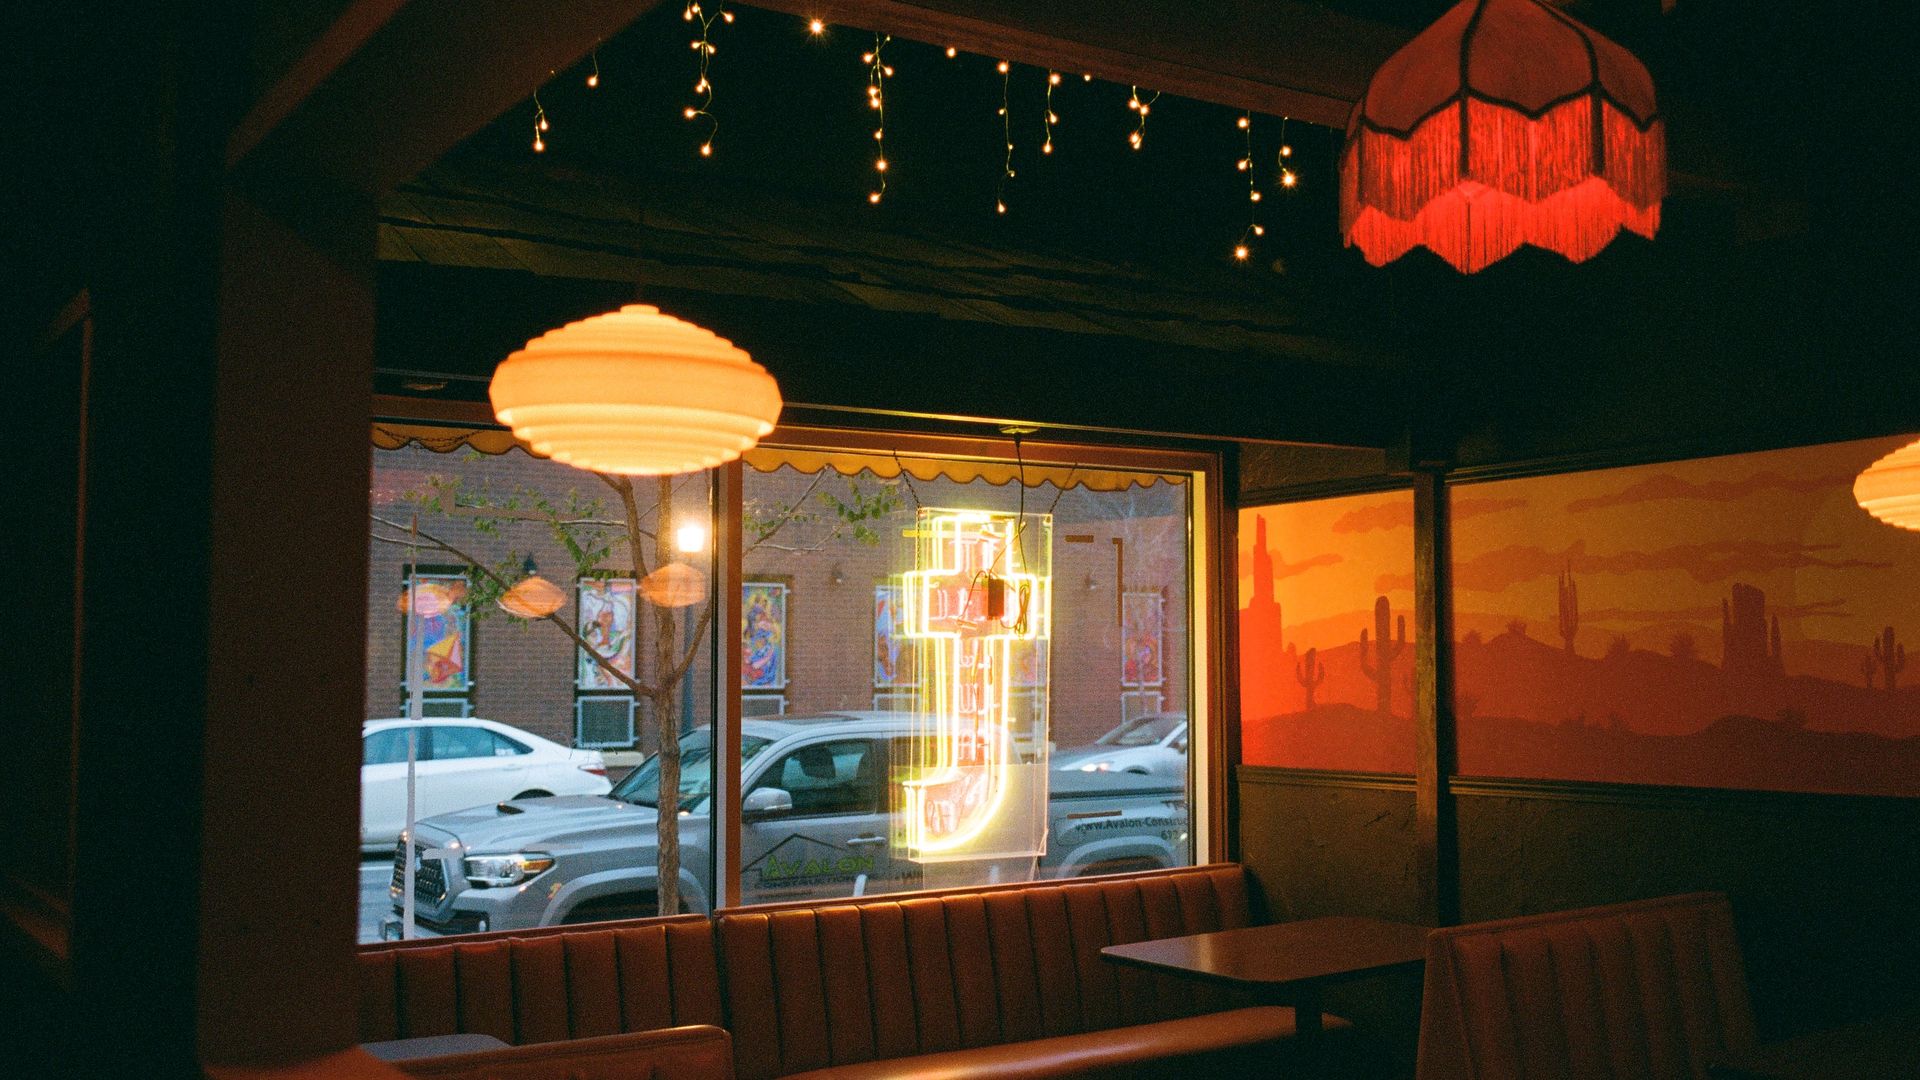 The inside of a restaurant with a neon sign in the shape of the letter T.